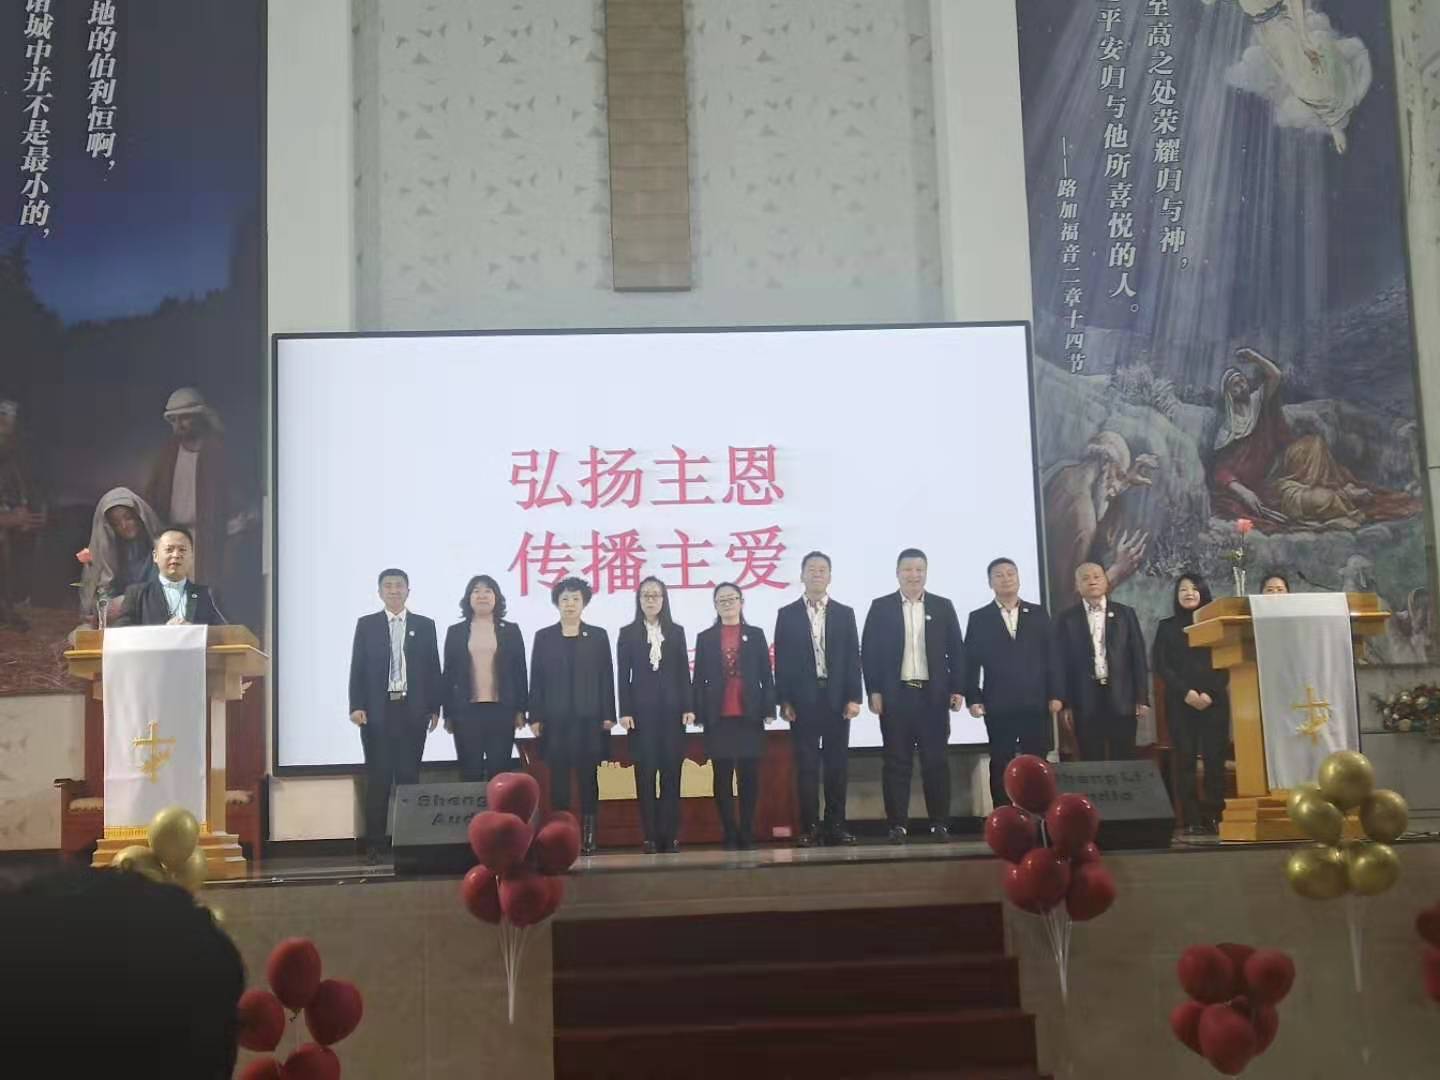 On the evening of December 29, 2019, the Dongfeng Nanzhan Church in Liaoyuan City held a farewell and evening prayer meeting attended by more than 90 people.